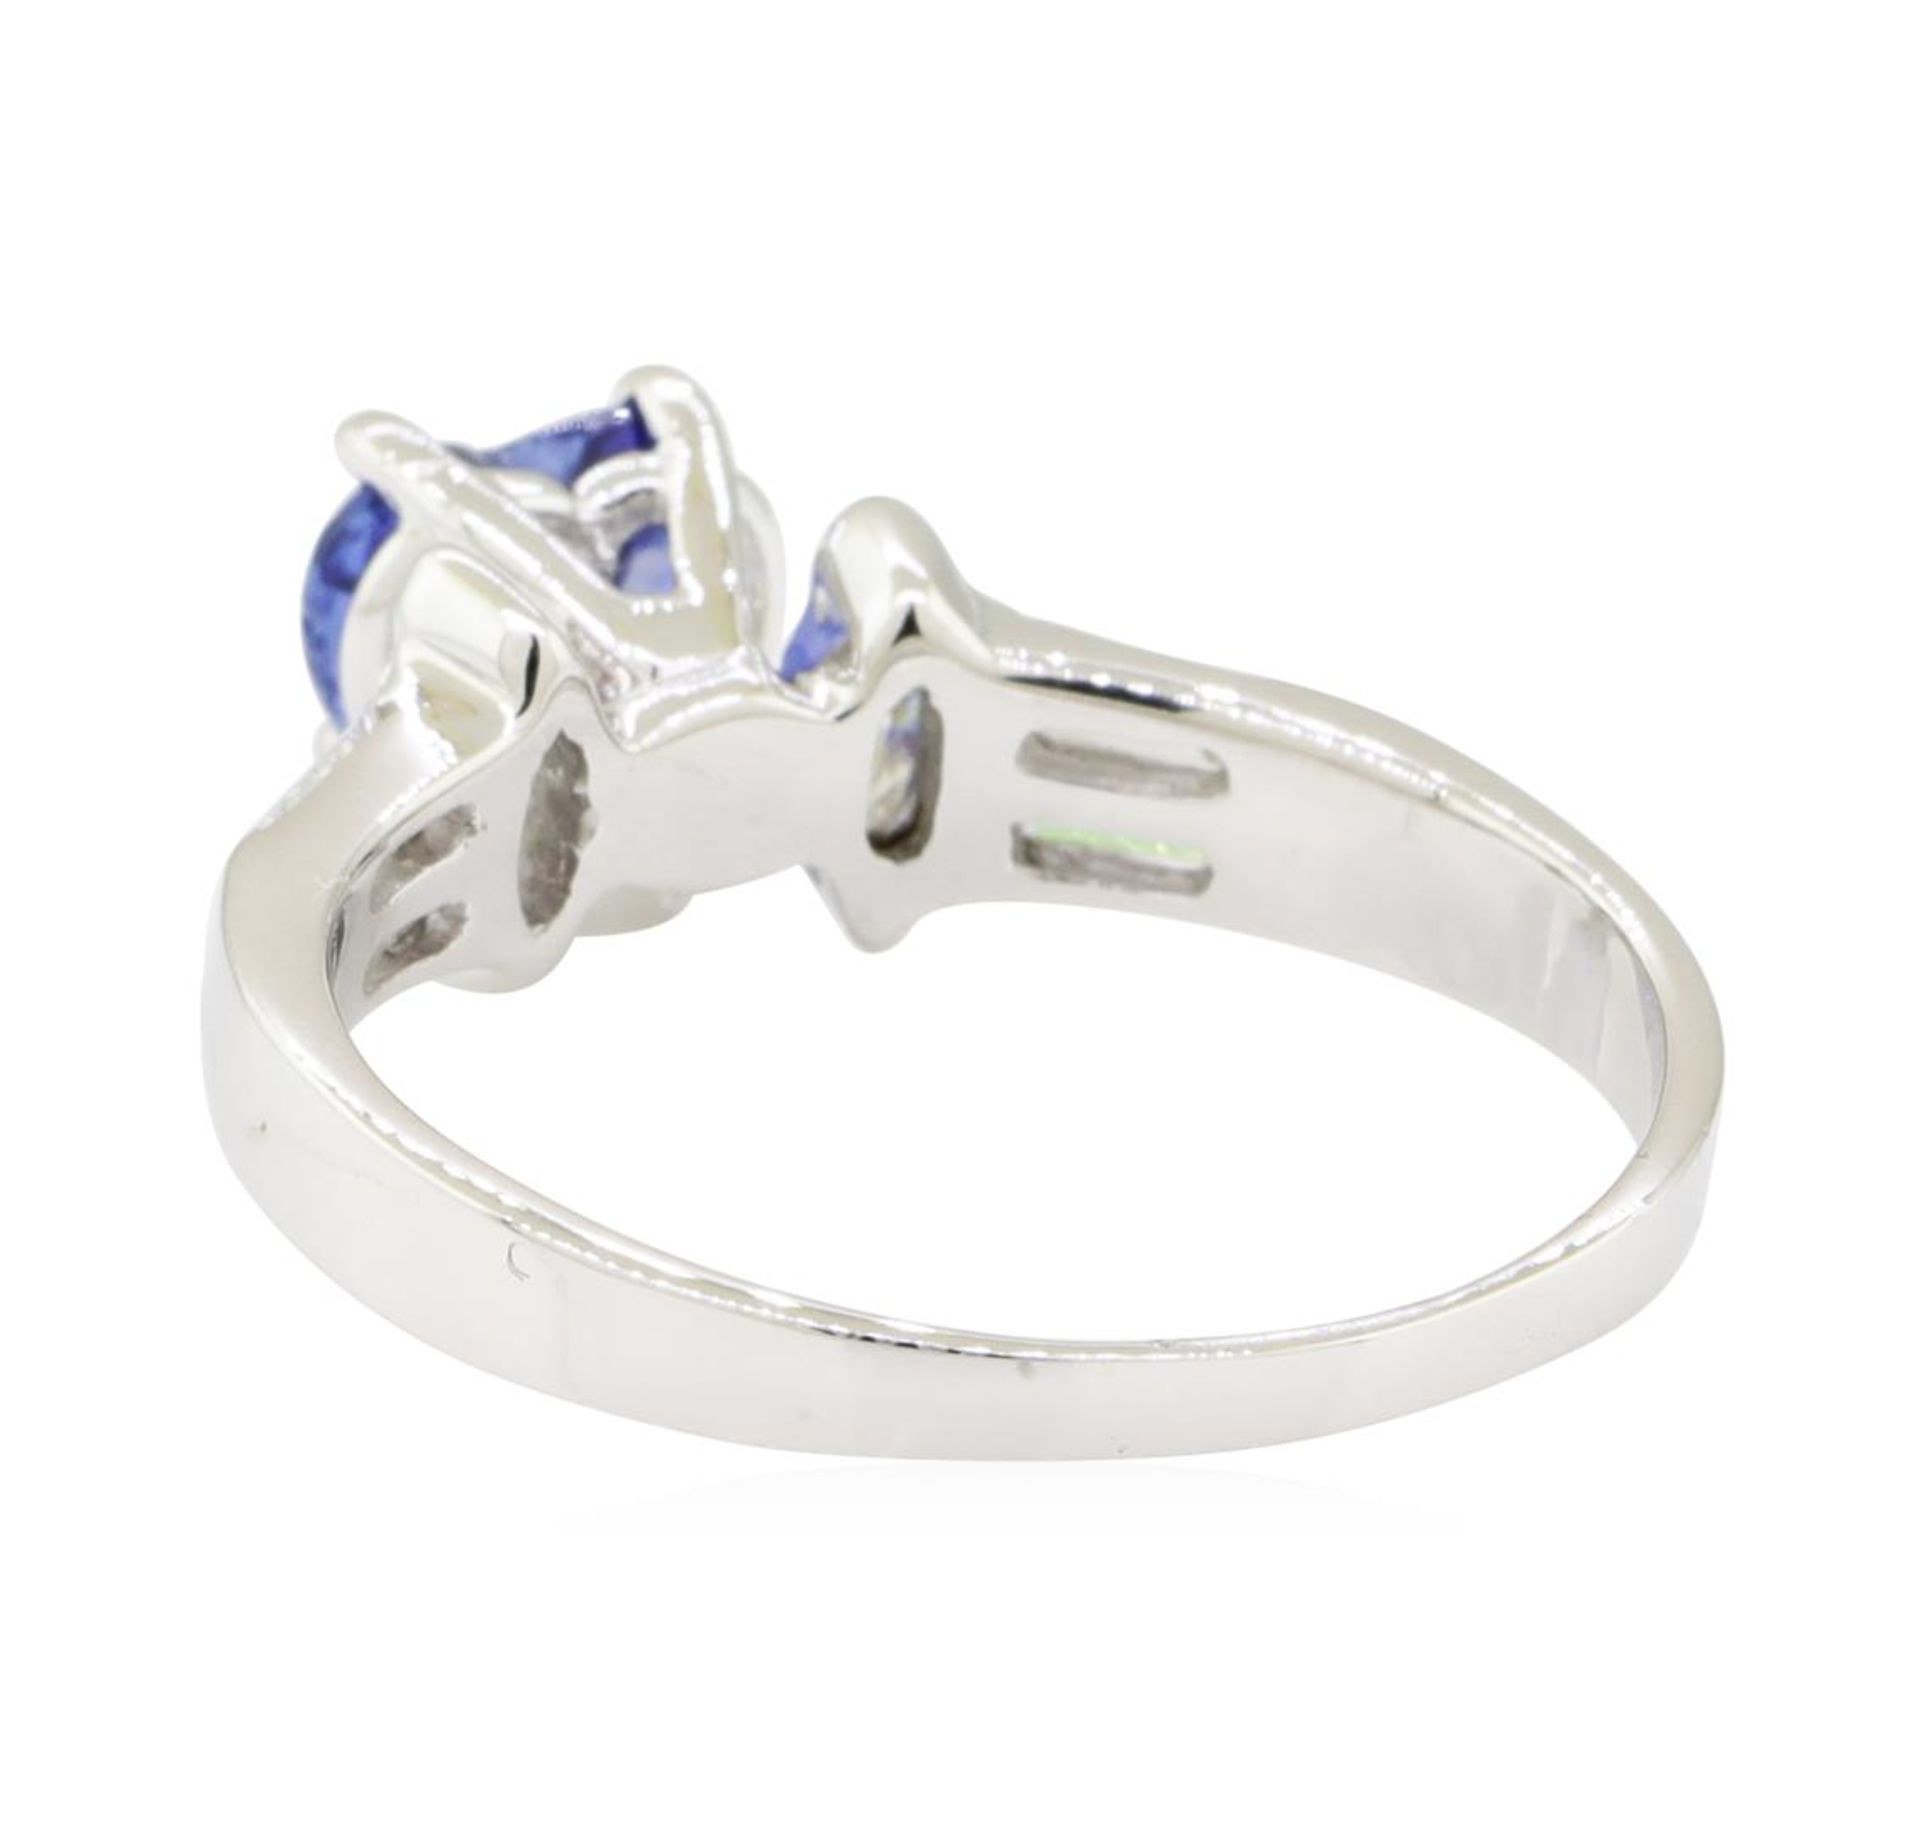 1.87 ctw Sapphire and Diamond Ring - 14KT White Gold - Image 3 of 5